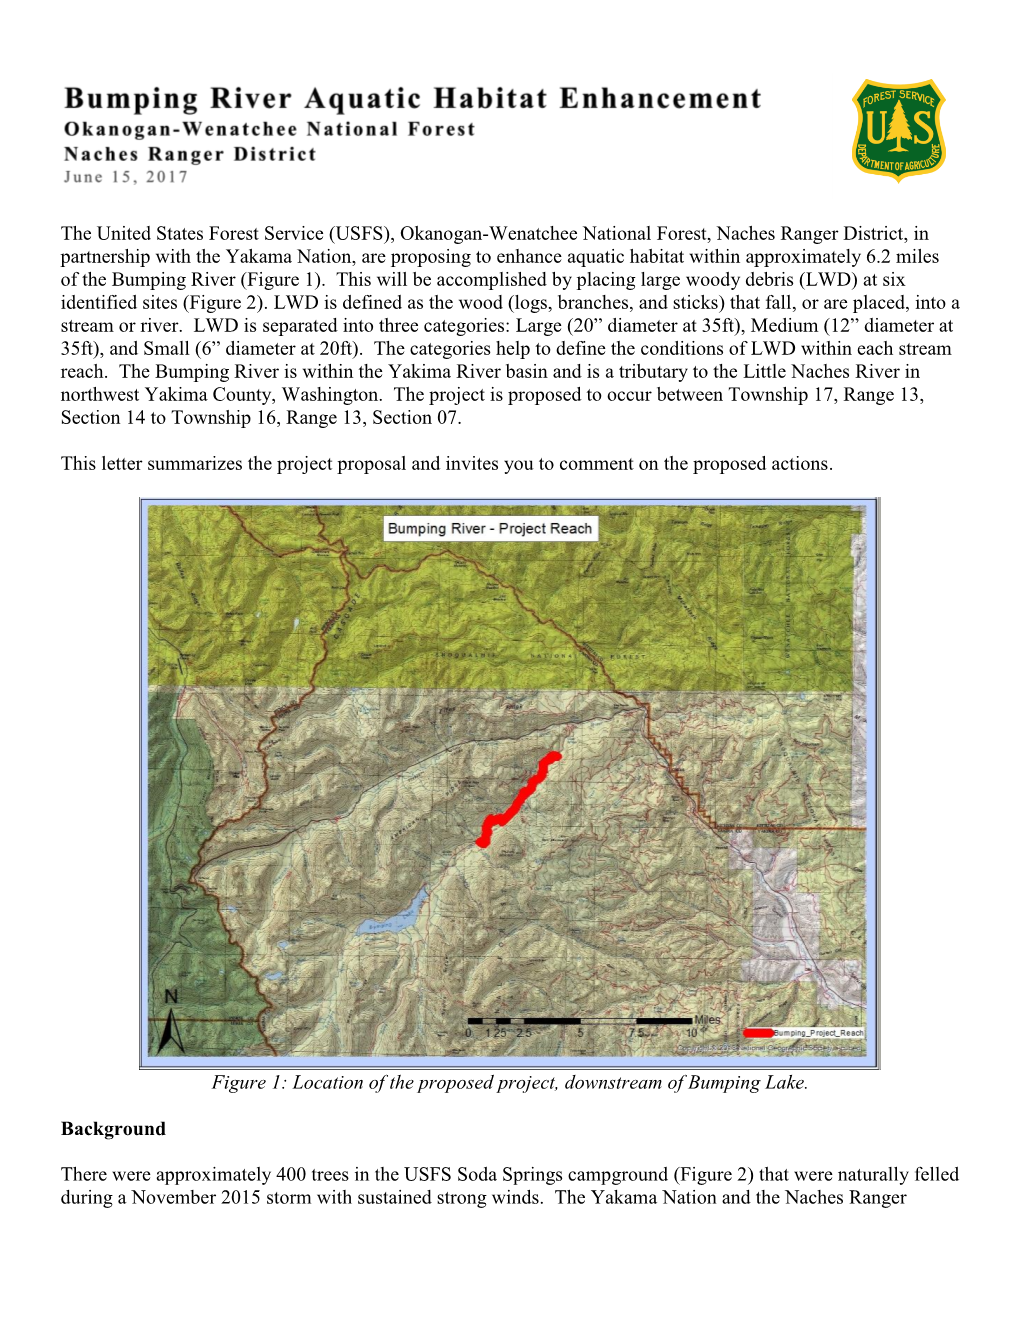 Okanogan-Wenatchee National Forest, Naches Ranger District, in Partnership with The